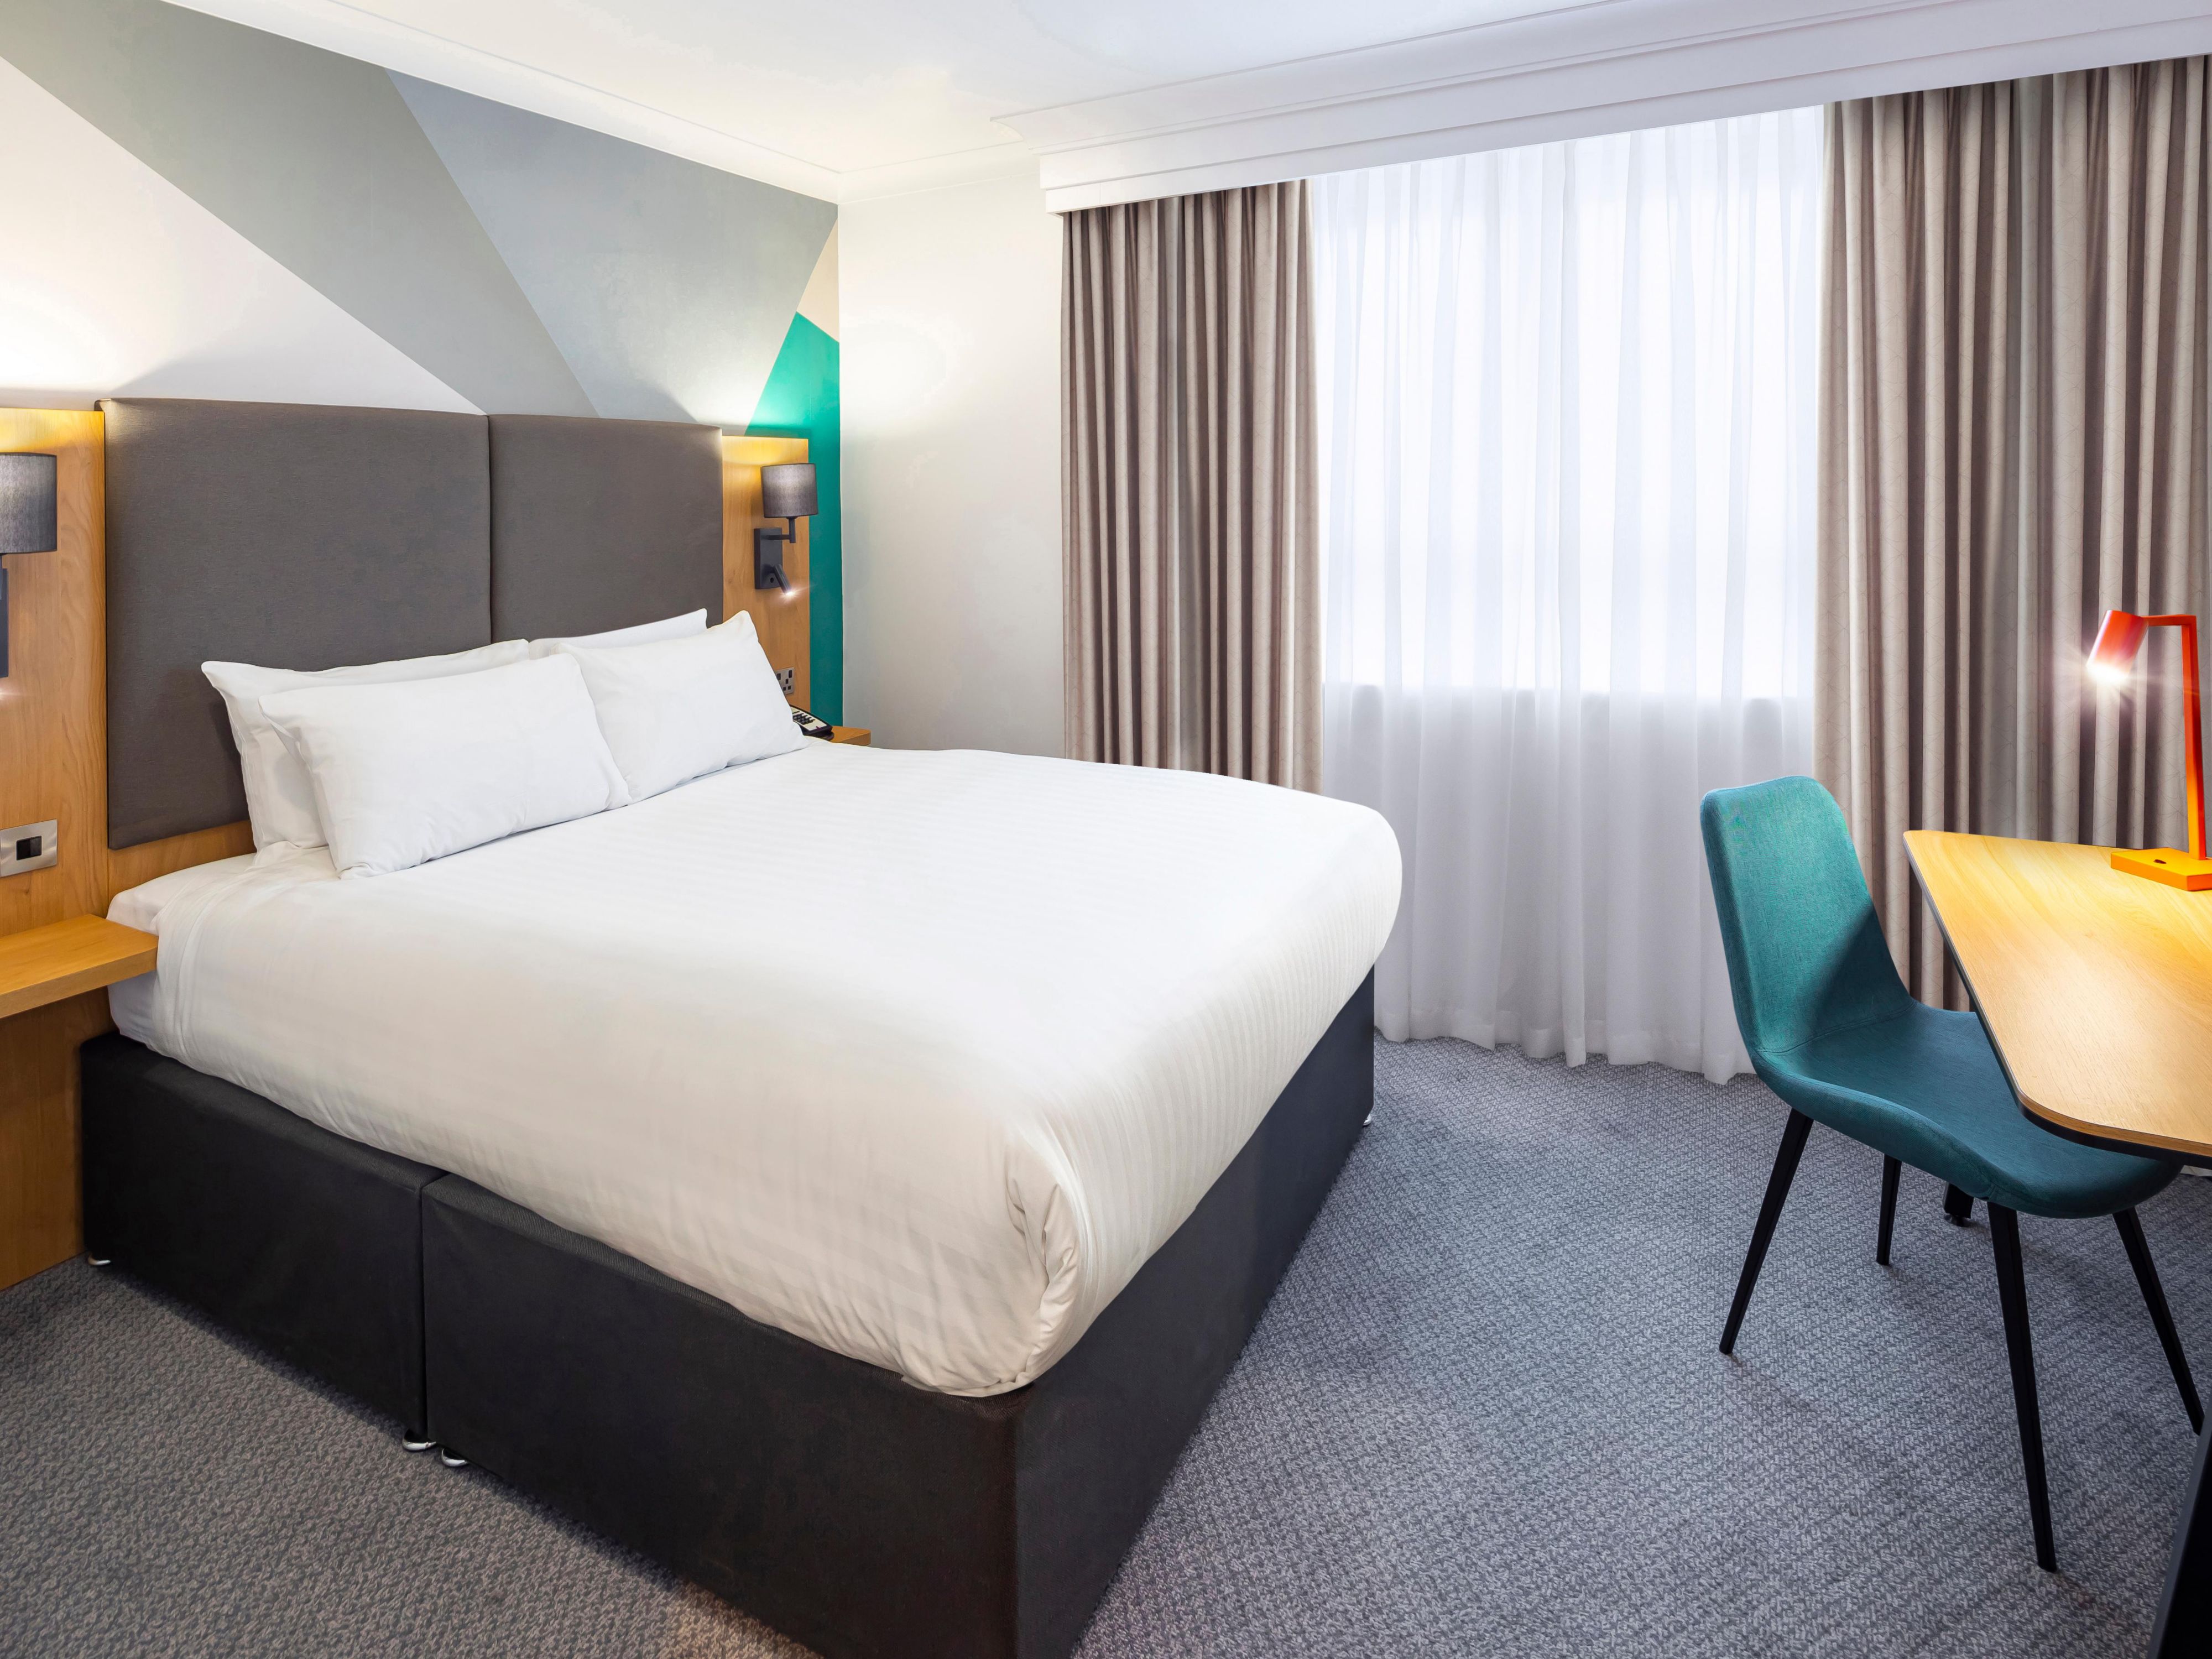 The wait is over! We are excited to present to you our 107 new refurbished bedrooms. Book your stay today and experience a restful and relaxed stay like no other. 
